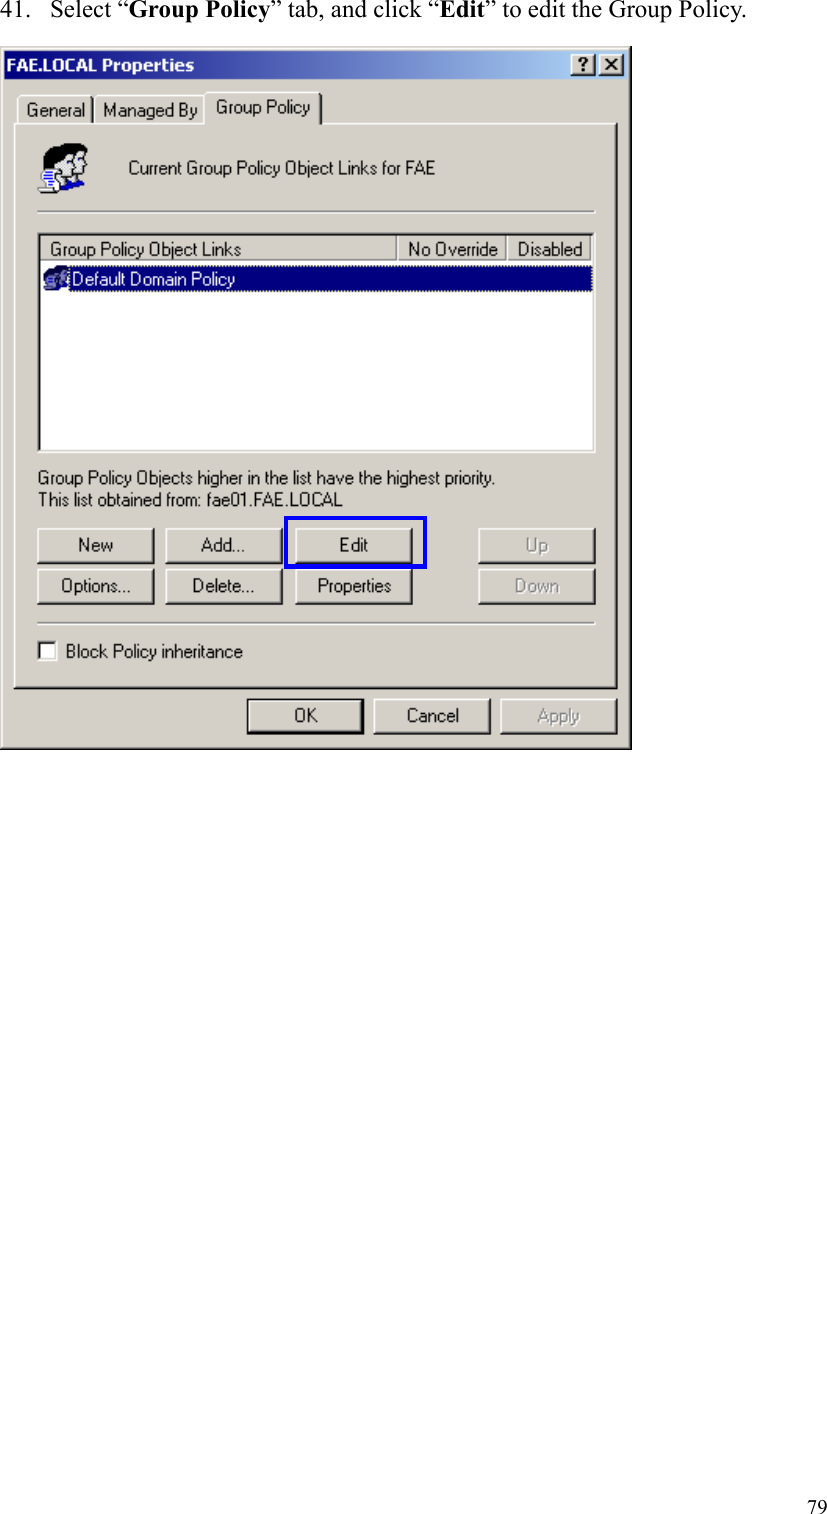 7941. Select “Group Policy” tab, and click “Edit” to edit the Group Policy.